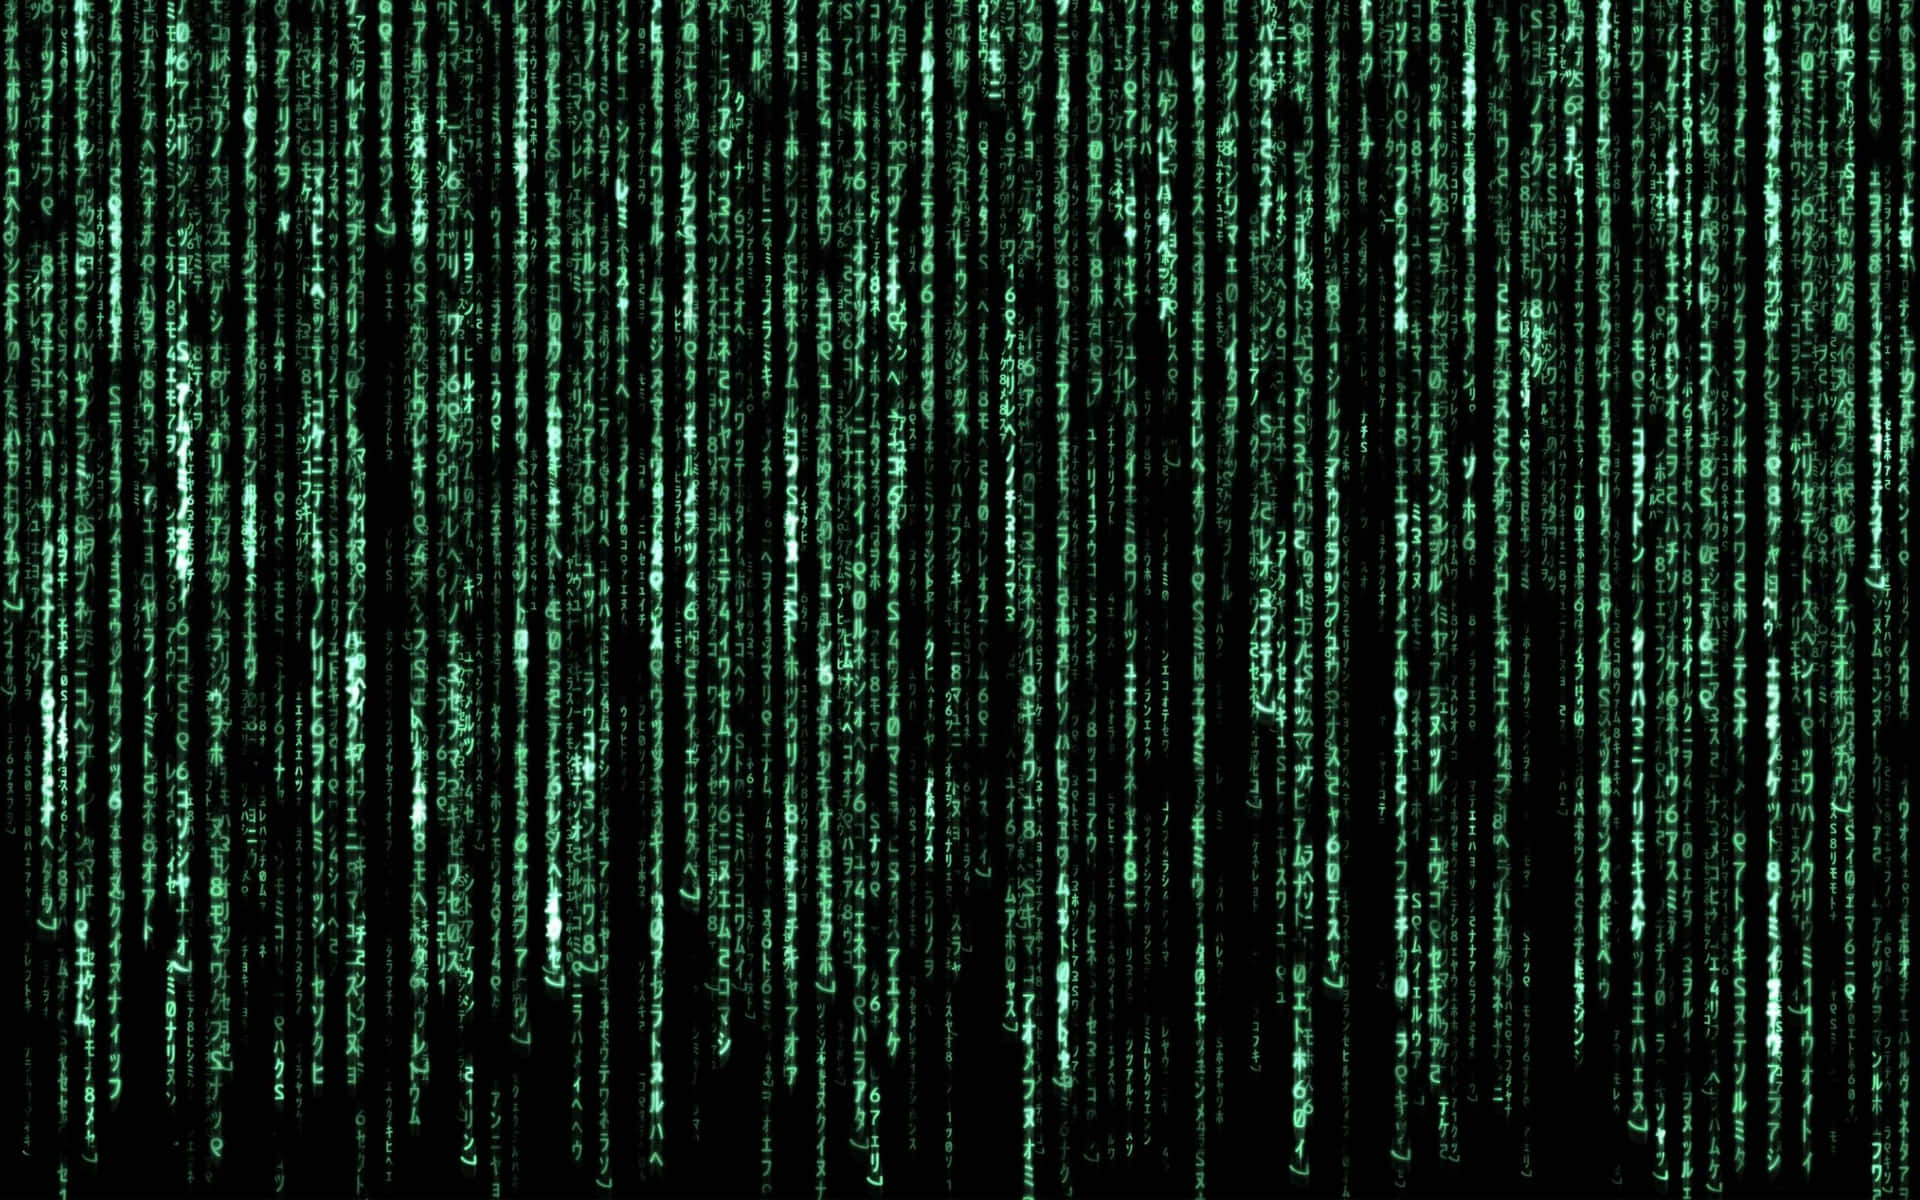 Zoom into the digital world of the Matrix